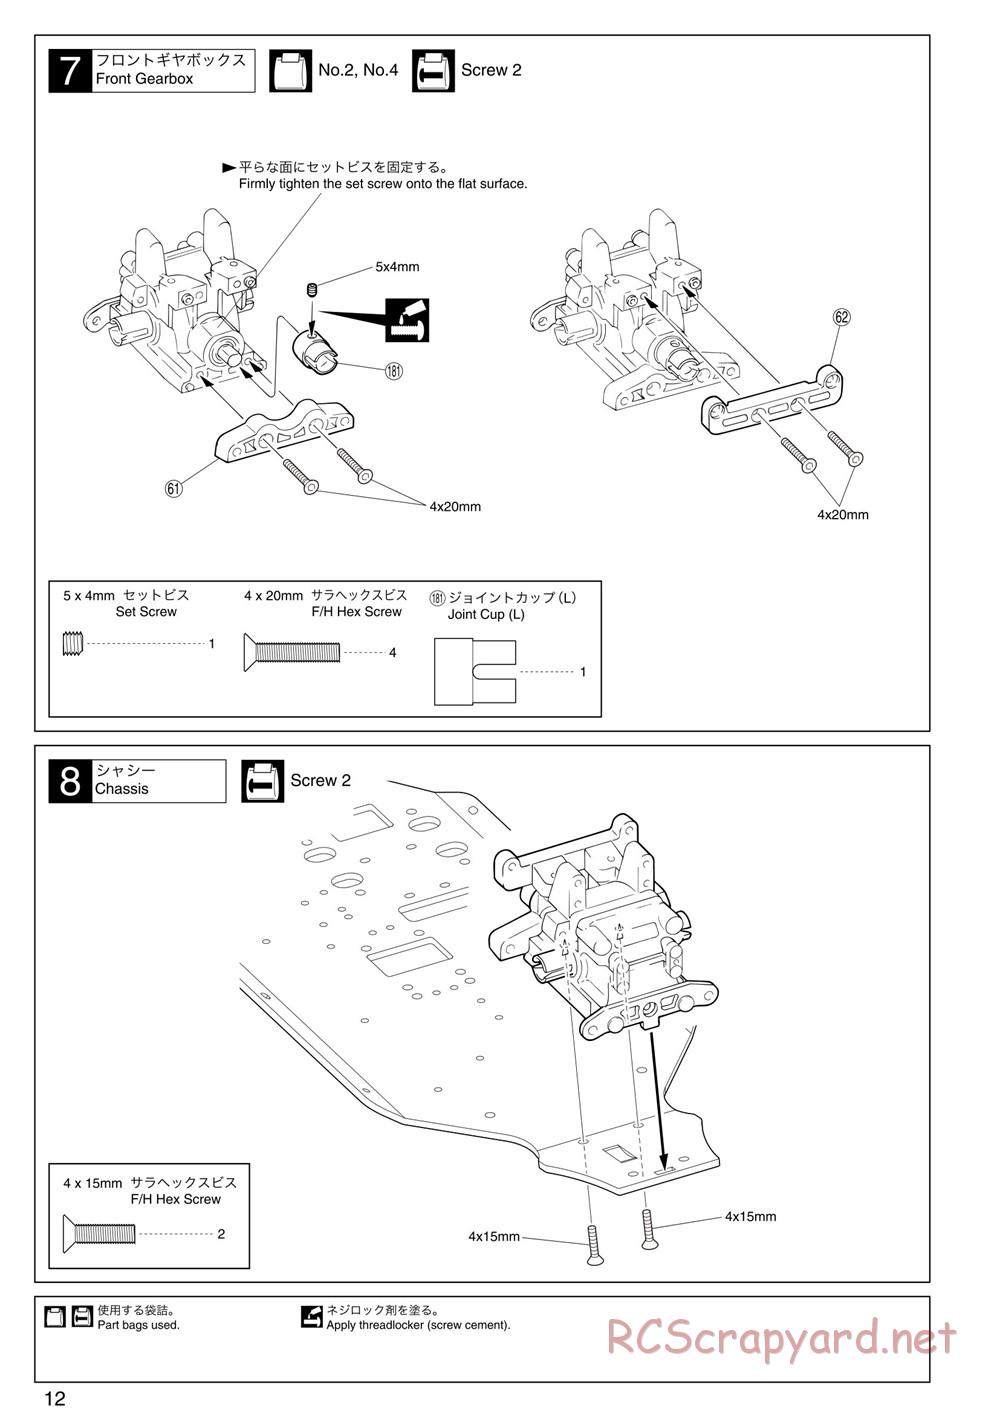 Kyosho - Inferno GT2 - Manual - Page 12